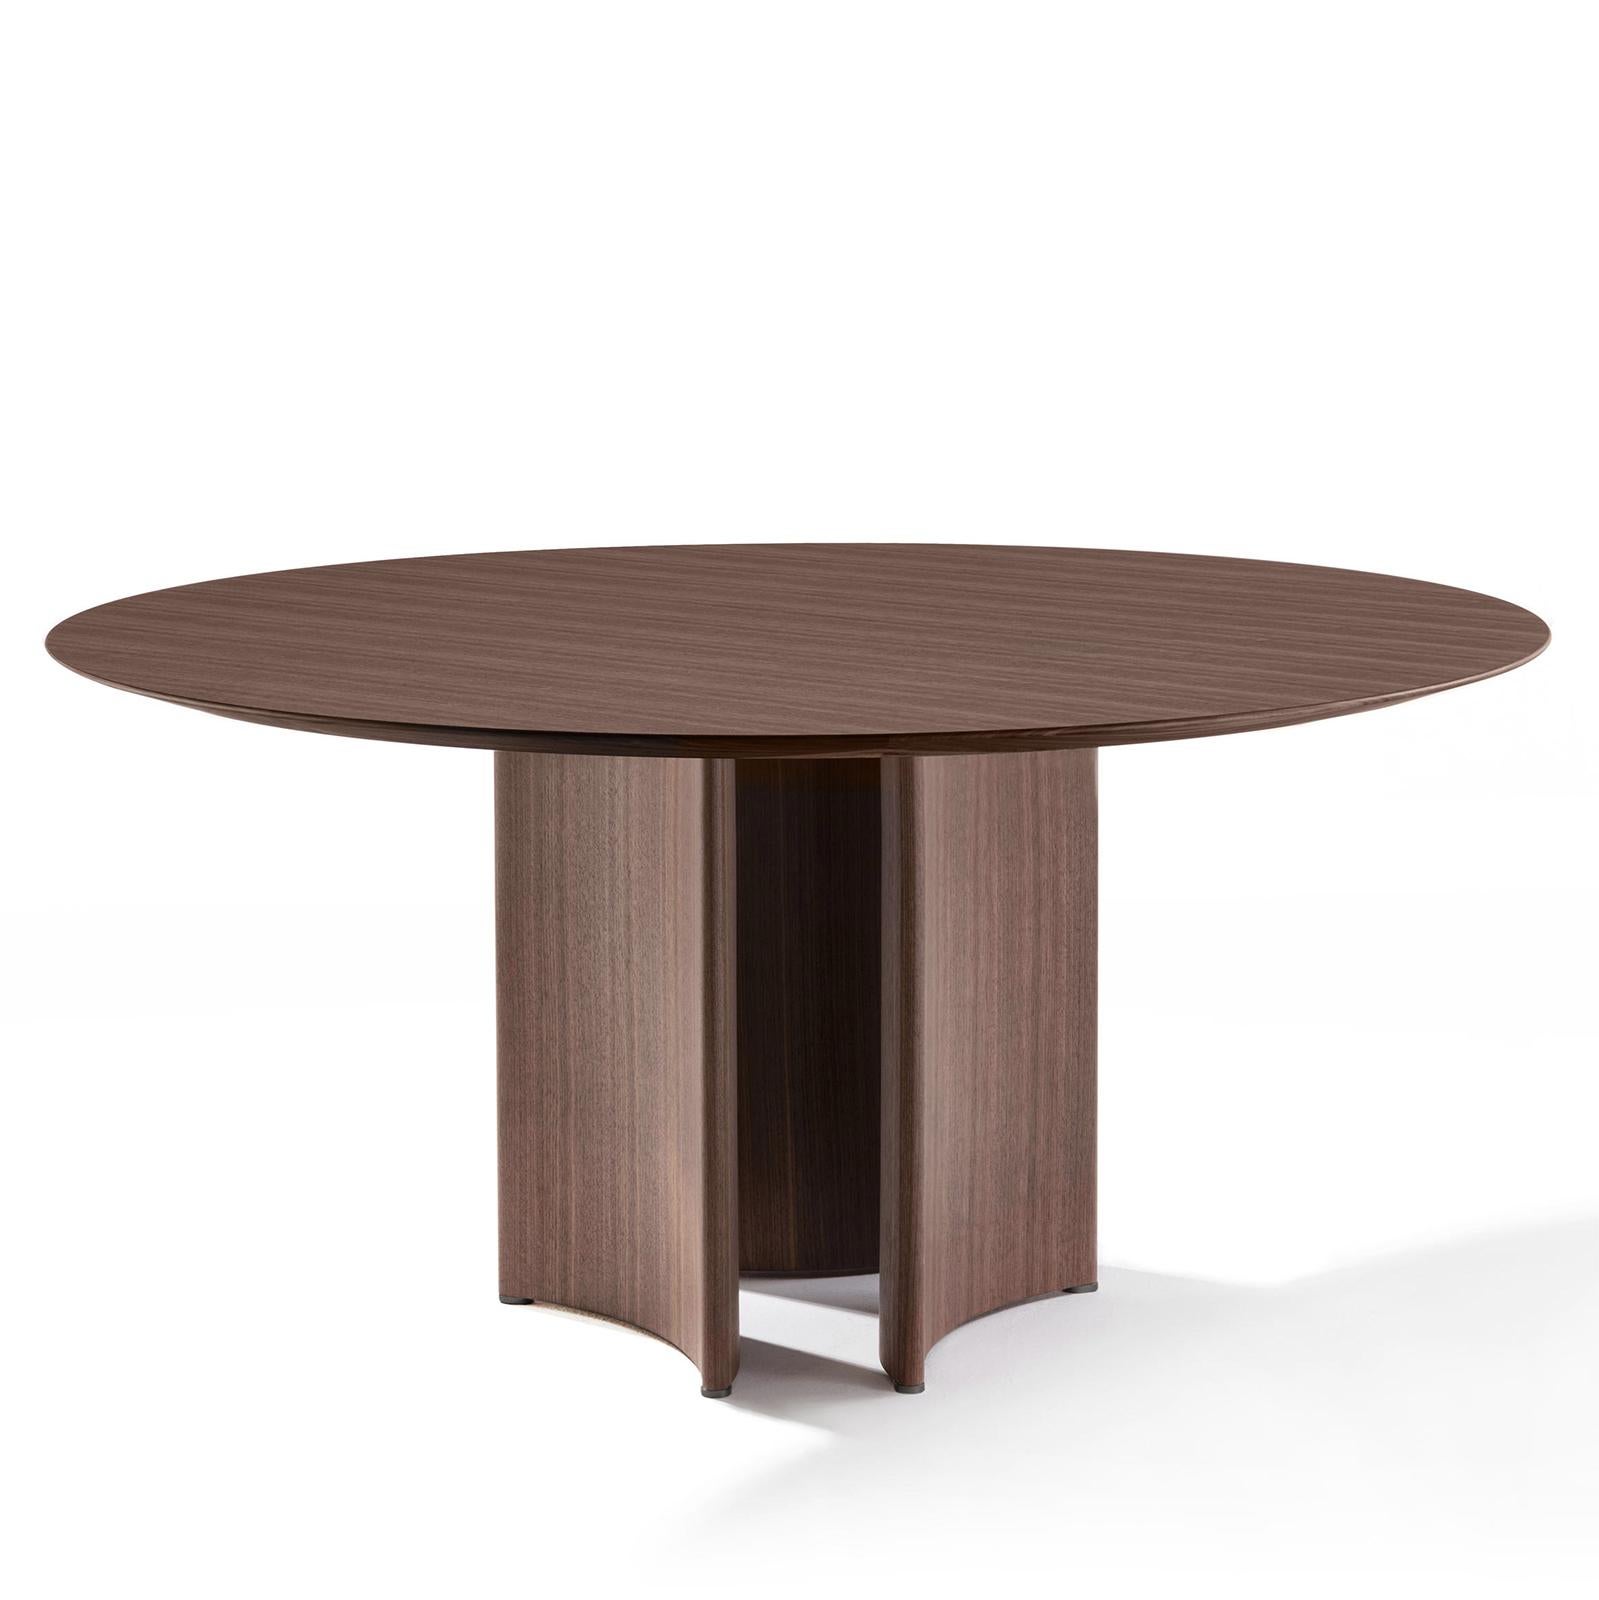 Dining table ornament with solid walnut wood beveled edge top, 40 mm thickness
and diameter 180cm. Base composed of 3 equidistant curved solid walnut wood feet
with black chromed end feet. Price: 24900,00€.
Also available with clear glass top, 15mm